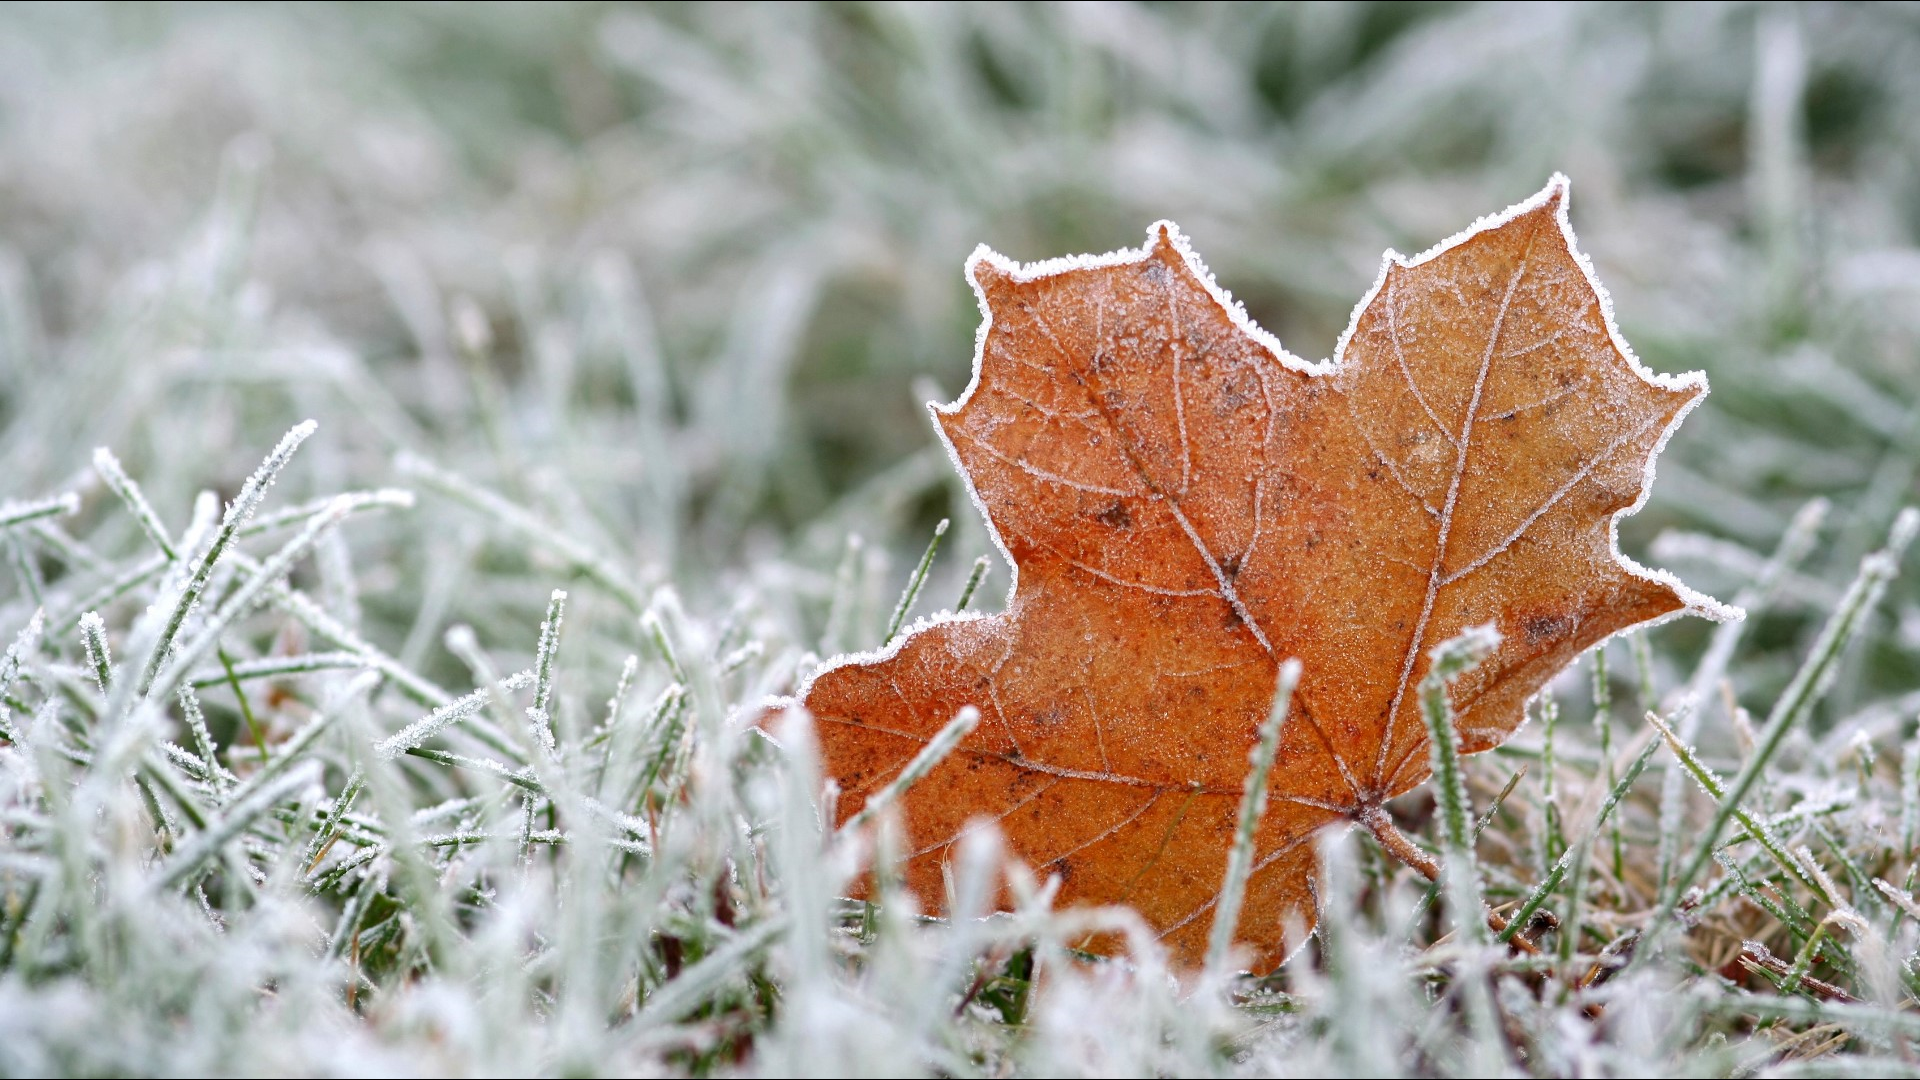 Potential sub-freezing temperatures may impact freshly planted, unprotected plants, the National Weather Service said.